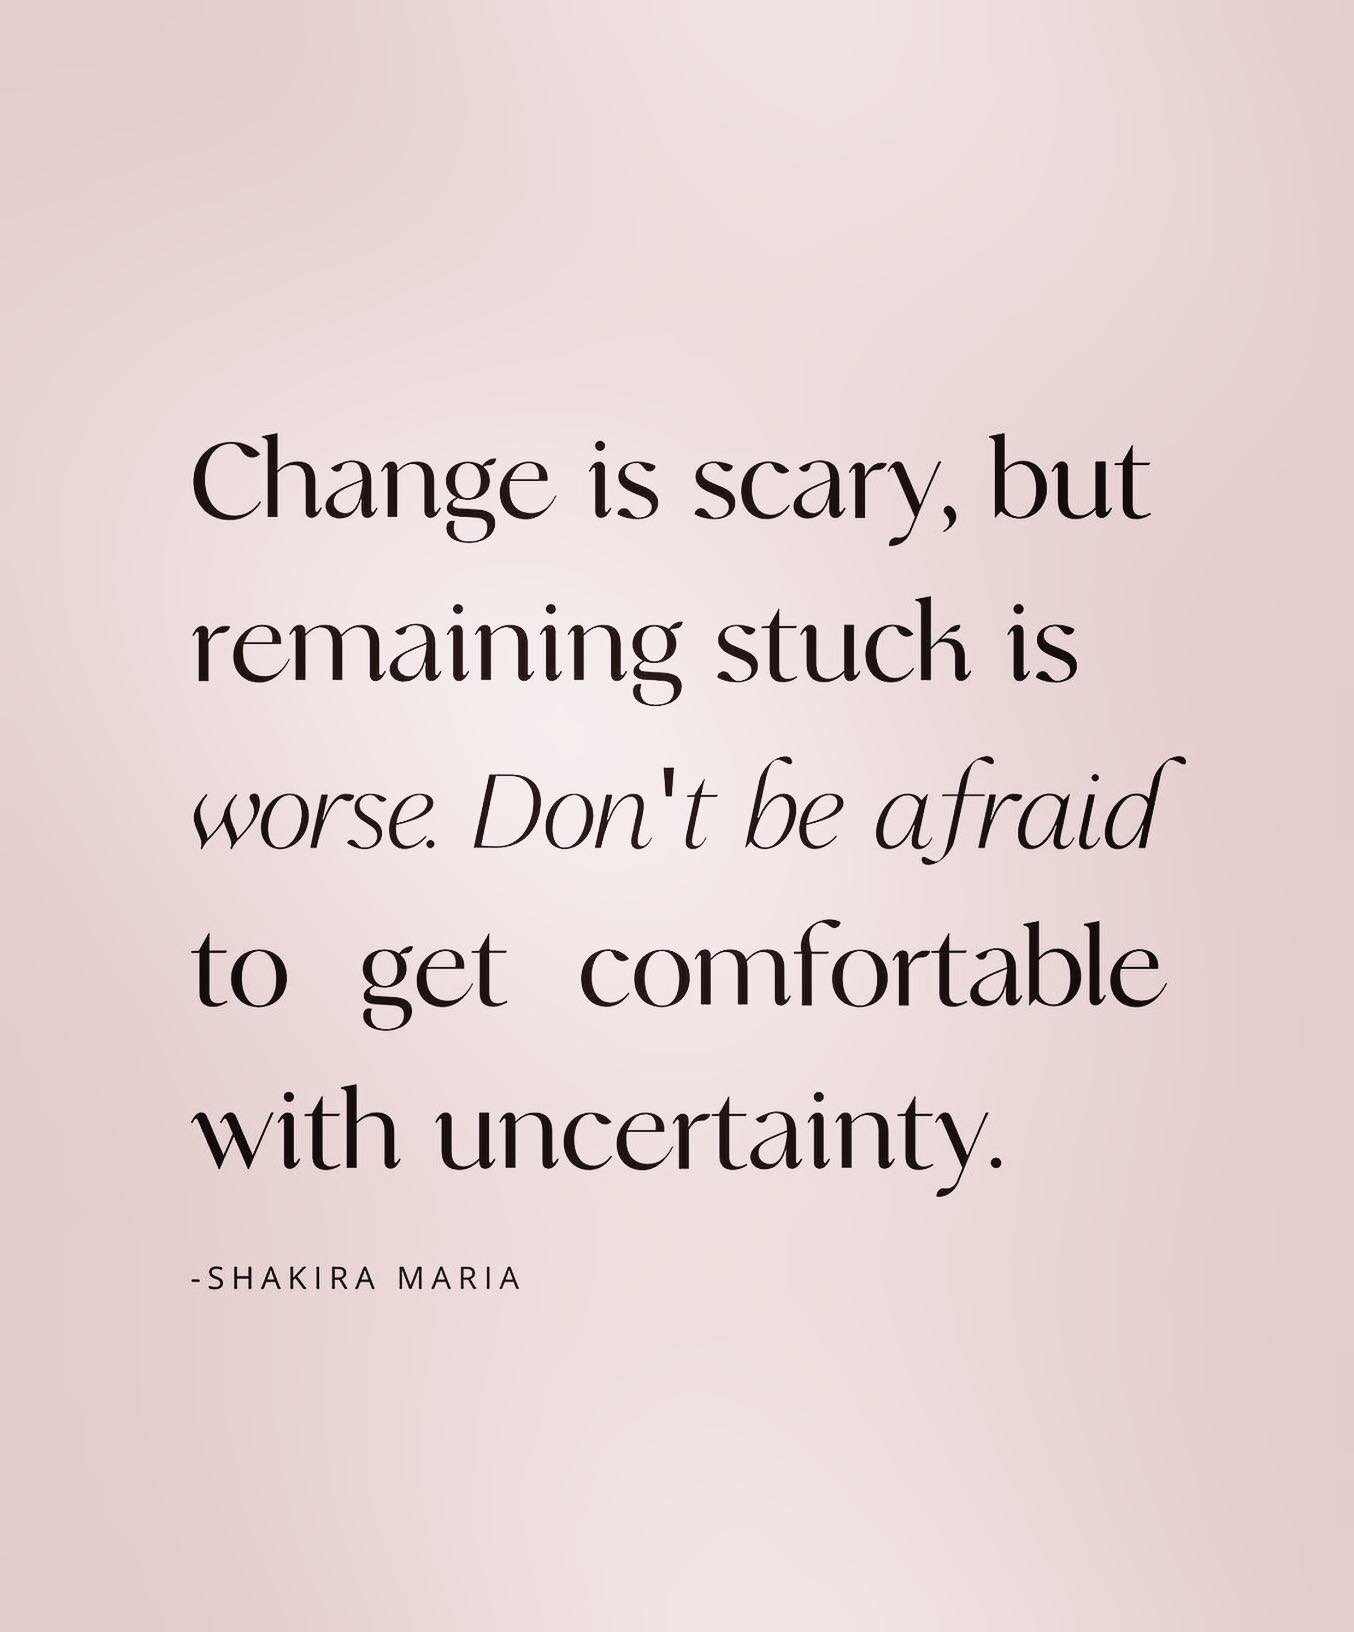 Fear of change can feel absolutely paralyzing and debilitating. But once you just let go and release your grip, finding that magic on the other side is so beautiful and so liberating. JUMP!  It&rsquo;s worth it❤️❤️